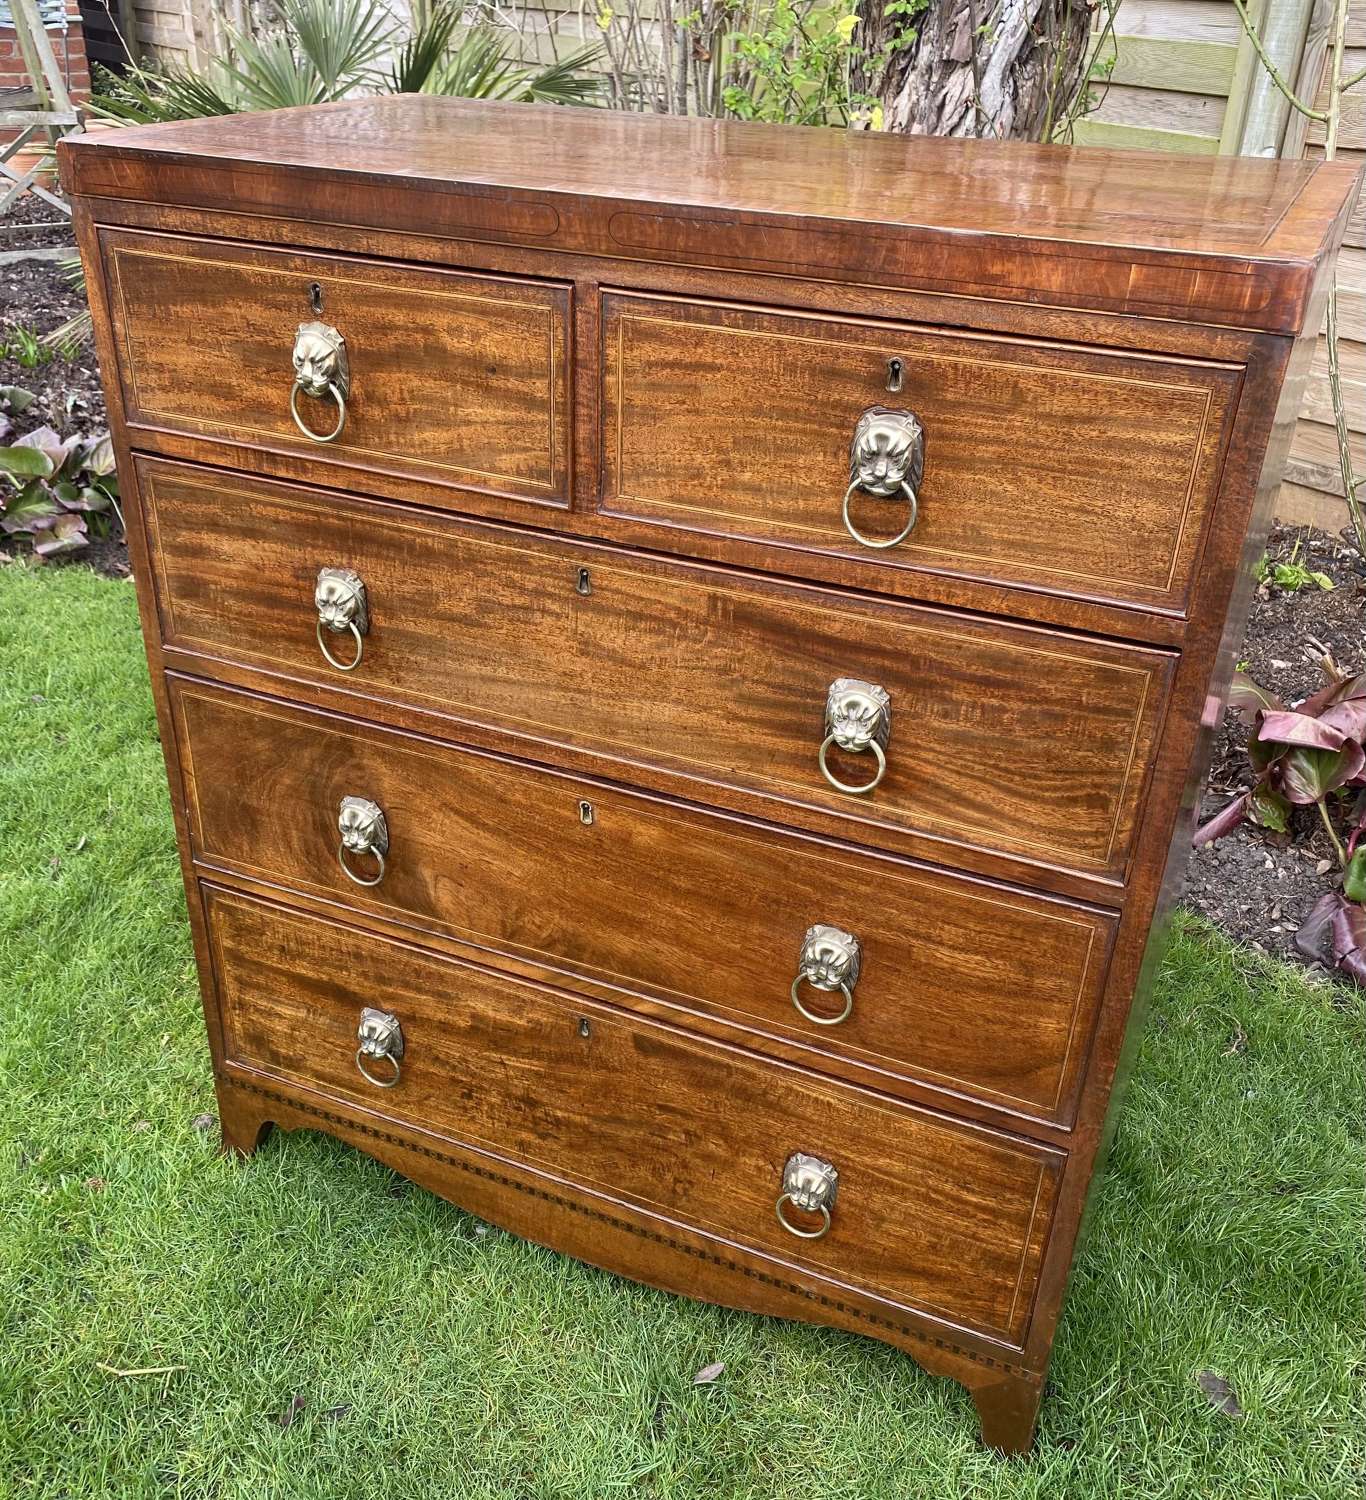 Small regency chest of drawers